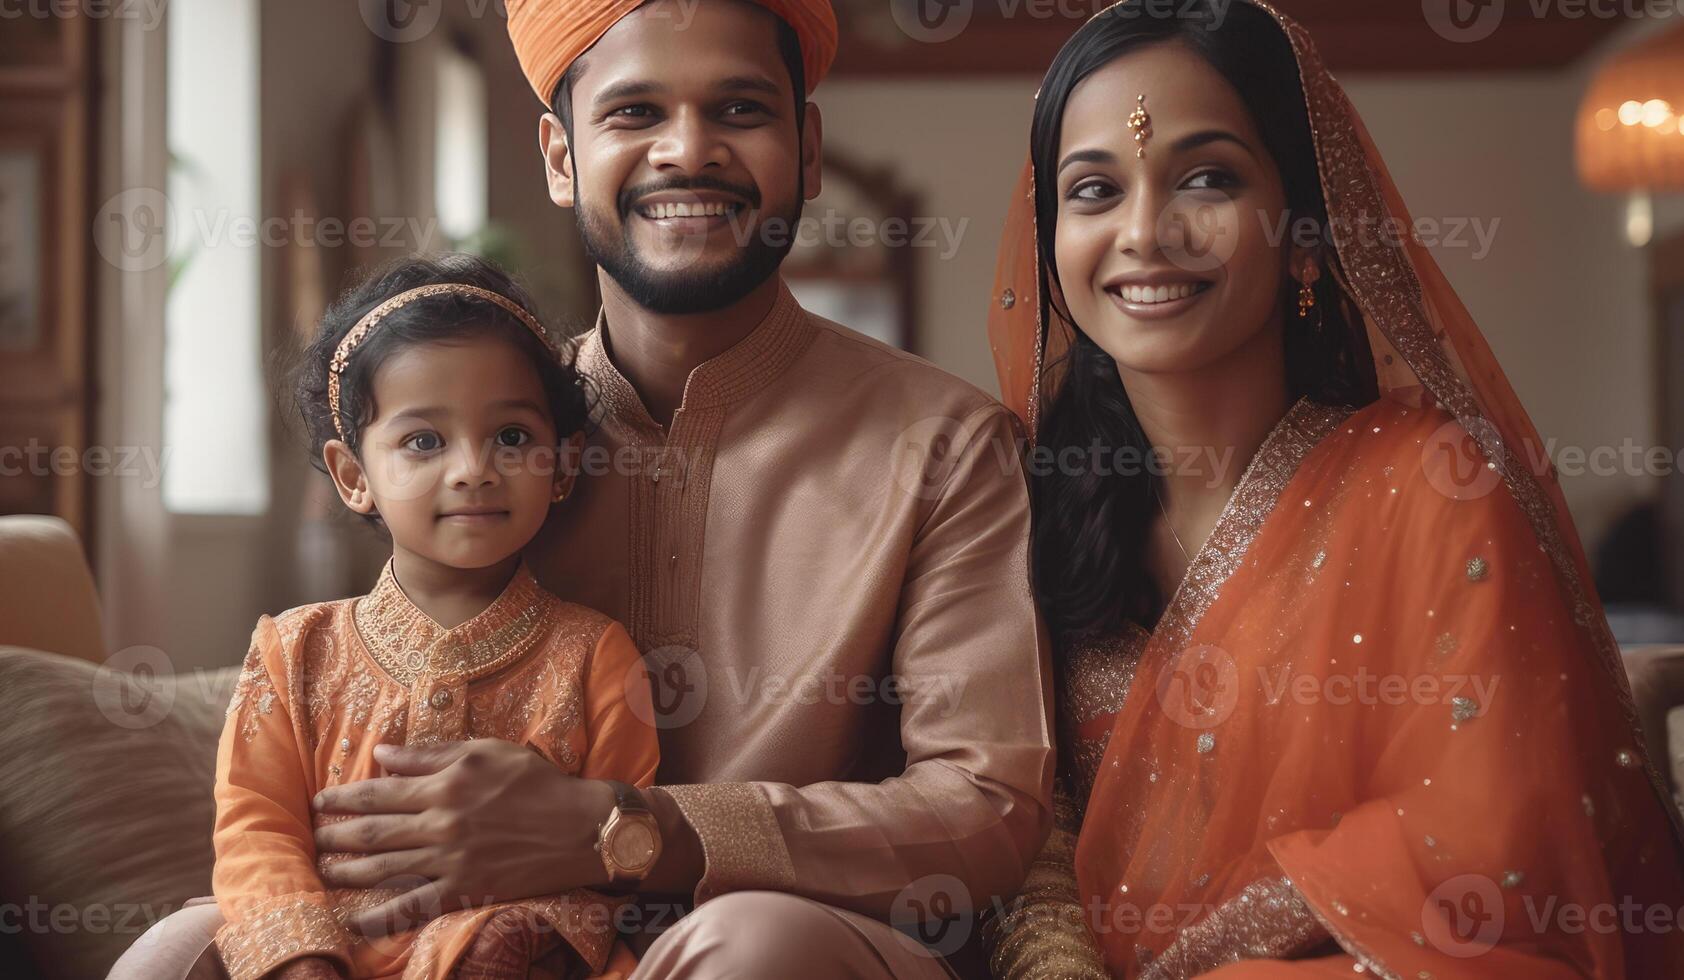 Realistic Portrait of Cheerful Muslim Family Wearing Traditional Attire During Eid Celebration, . photo